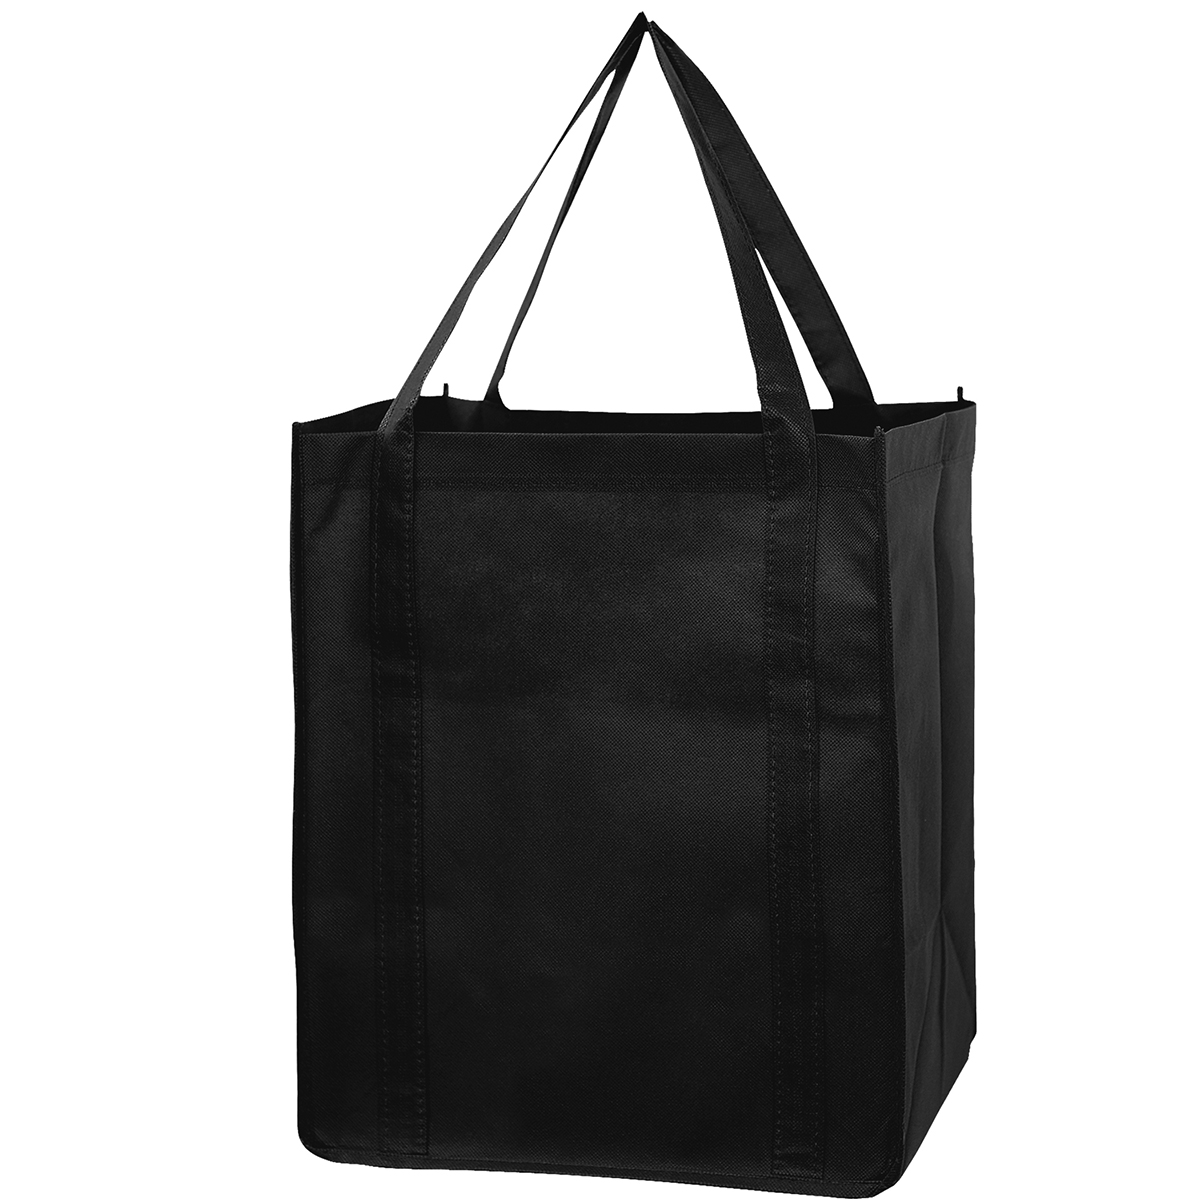 Black Recession Buster Grocery Bag with Insert (13"W x 10"G x 15"H)